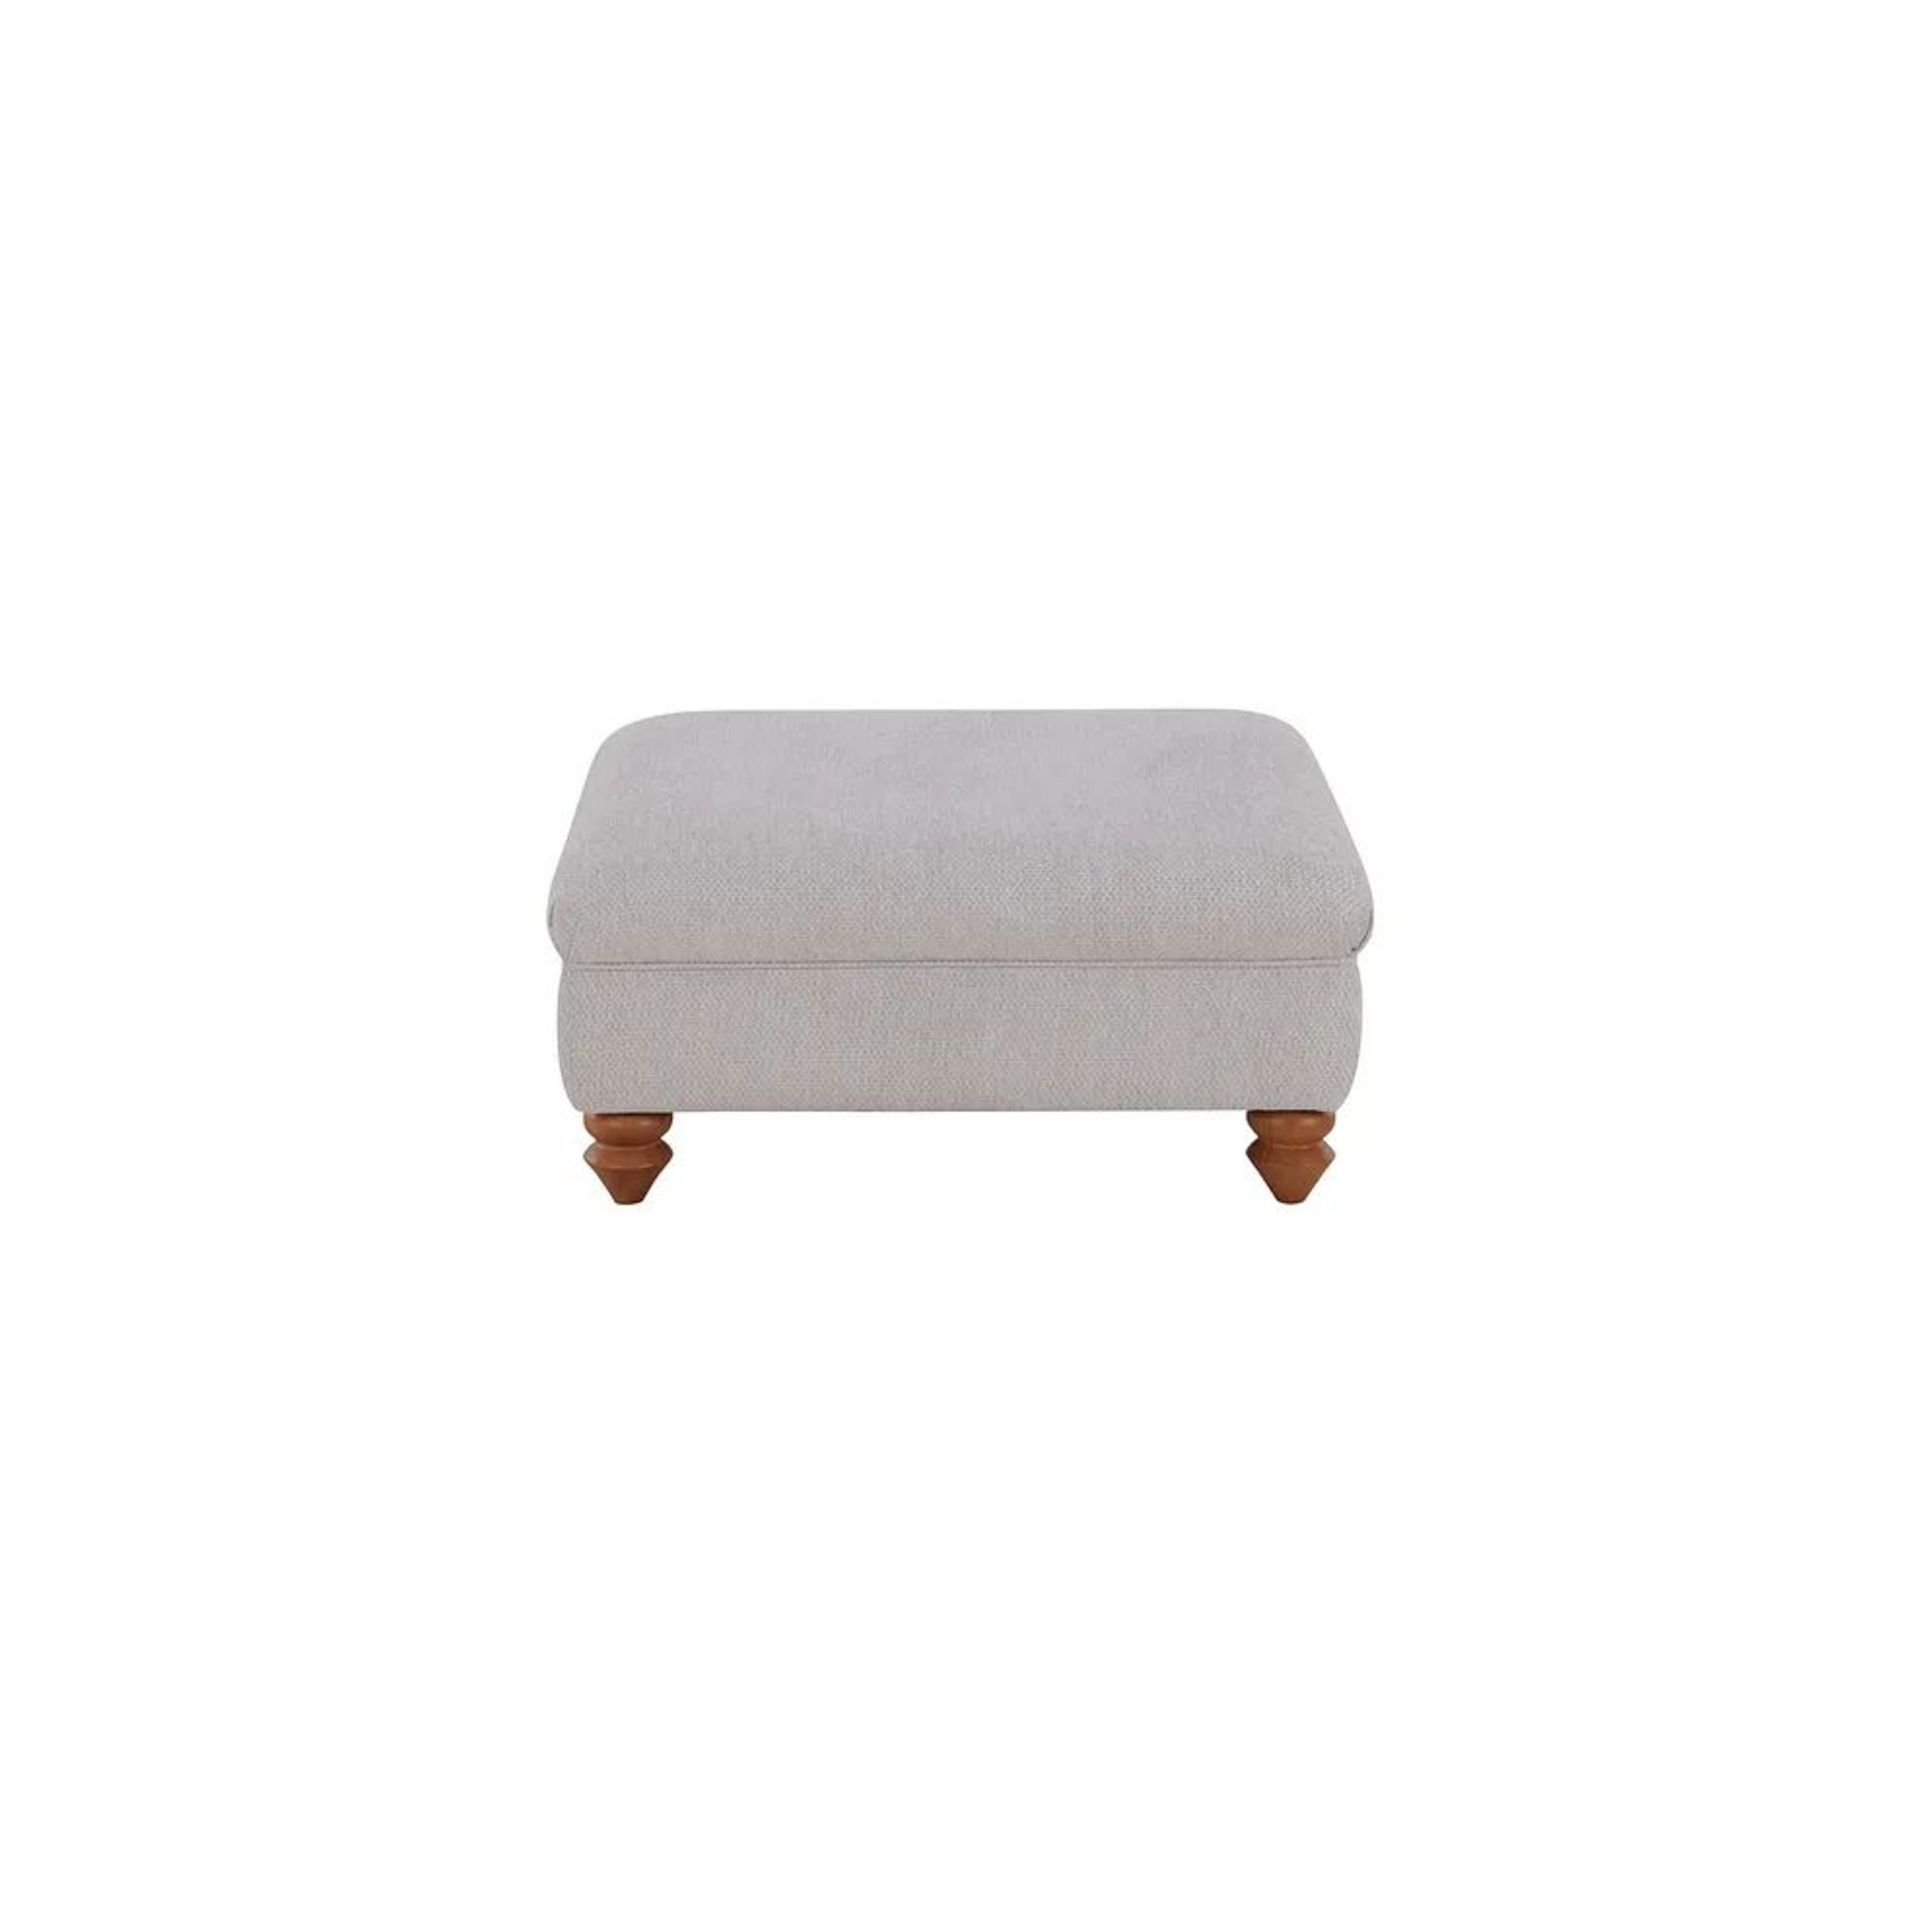 BRAND NEW GAINSBROUGH Footstool - MINERVA SILVER. RRP £369. Elegant and inviting, our Gainsborough - Image 2 of 6